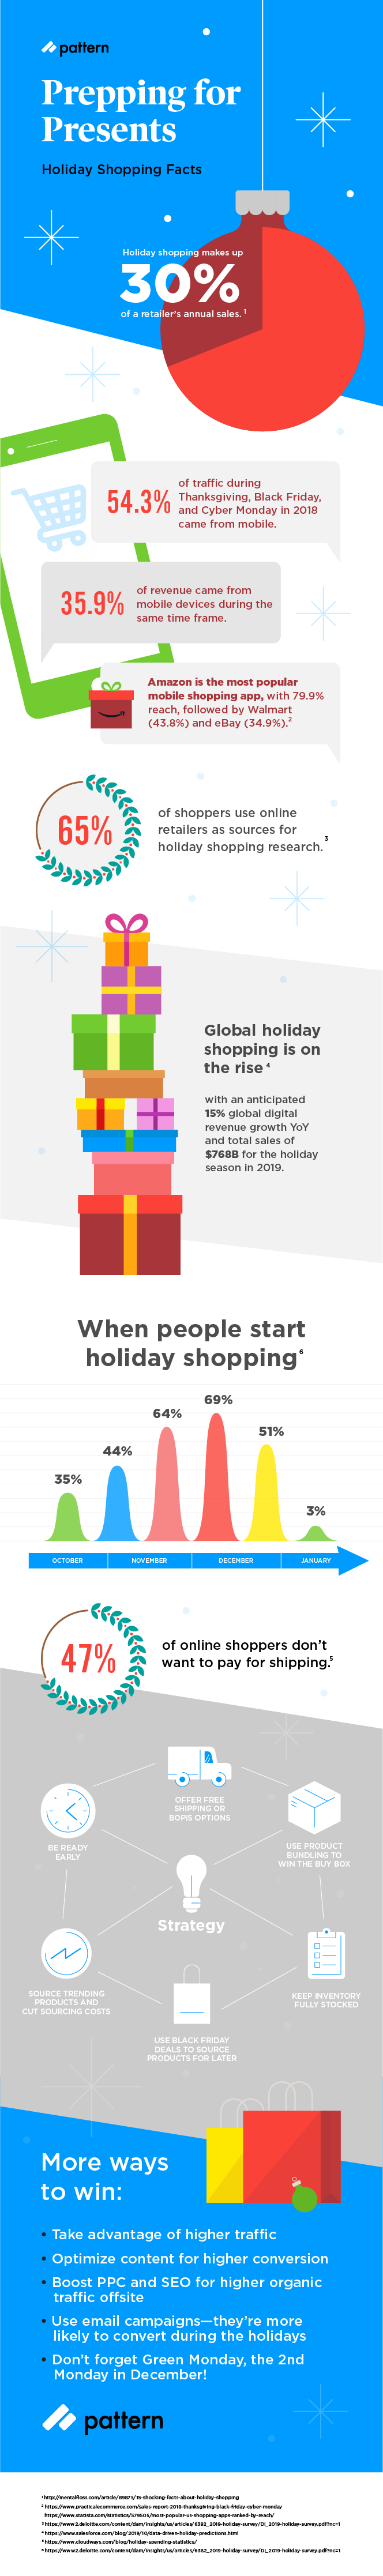 Most shoppers complete their Christmas shopping during Black Friday or Cyber Monday. The holiday season is an important one for Amazon sellers. This infographic explains all of the facts eCommerce sellers need to know to prep their stores for the holiday season.